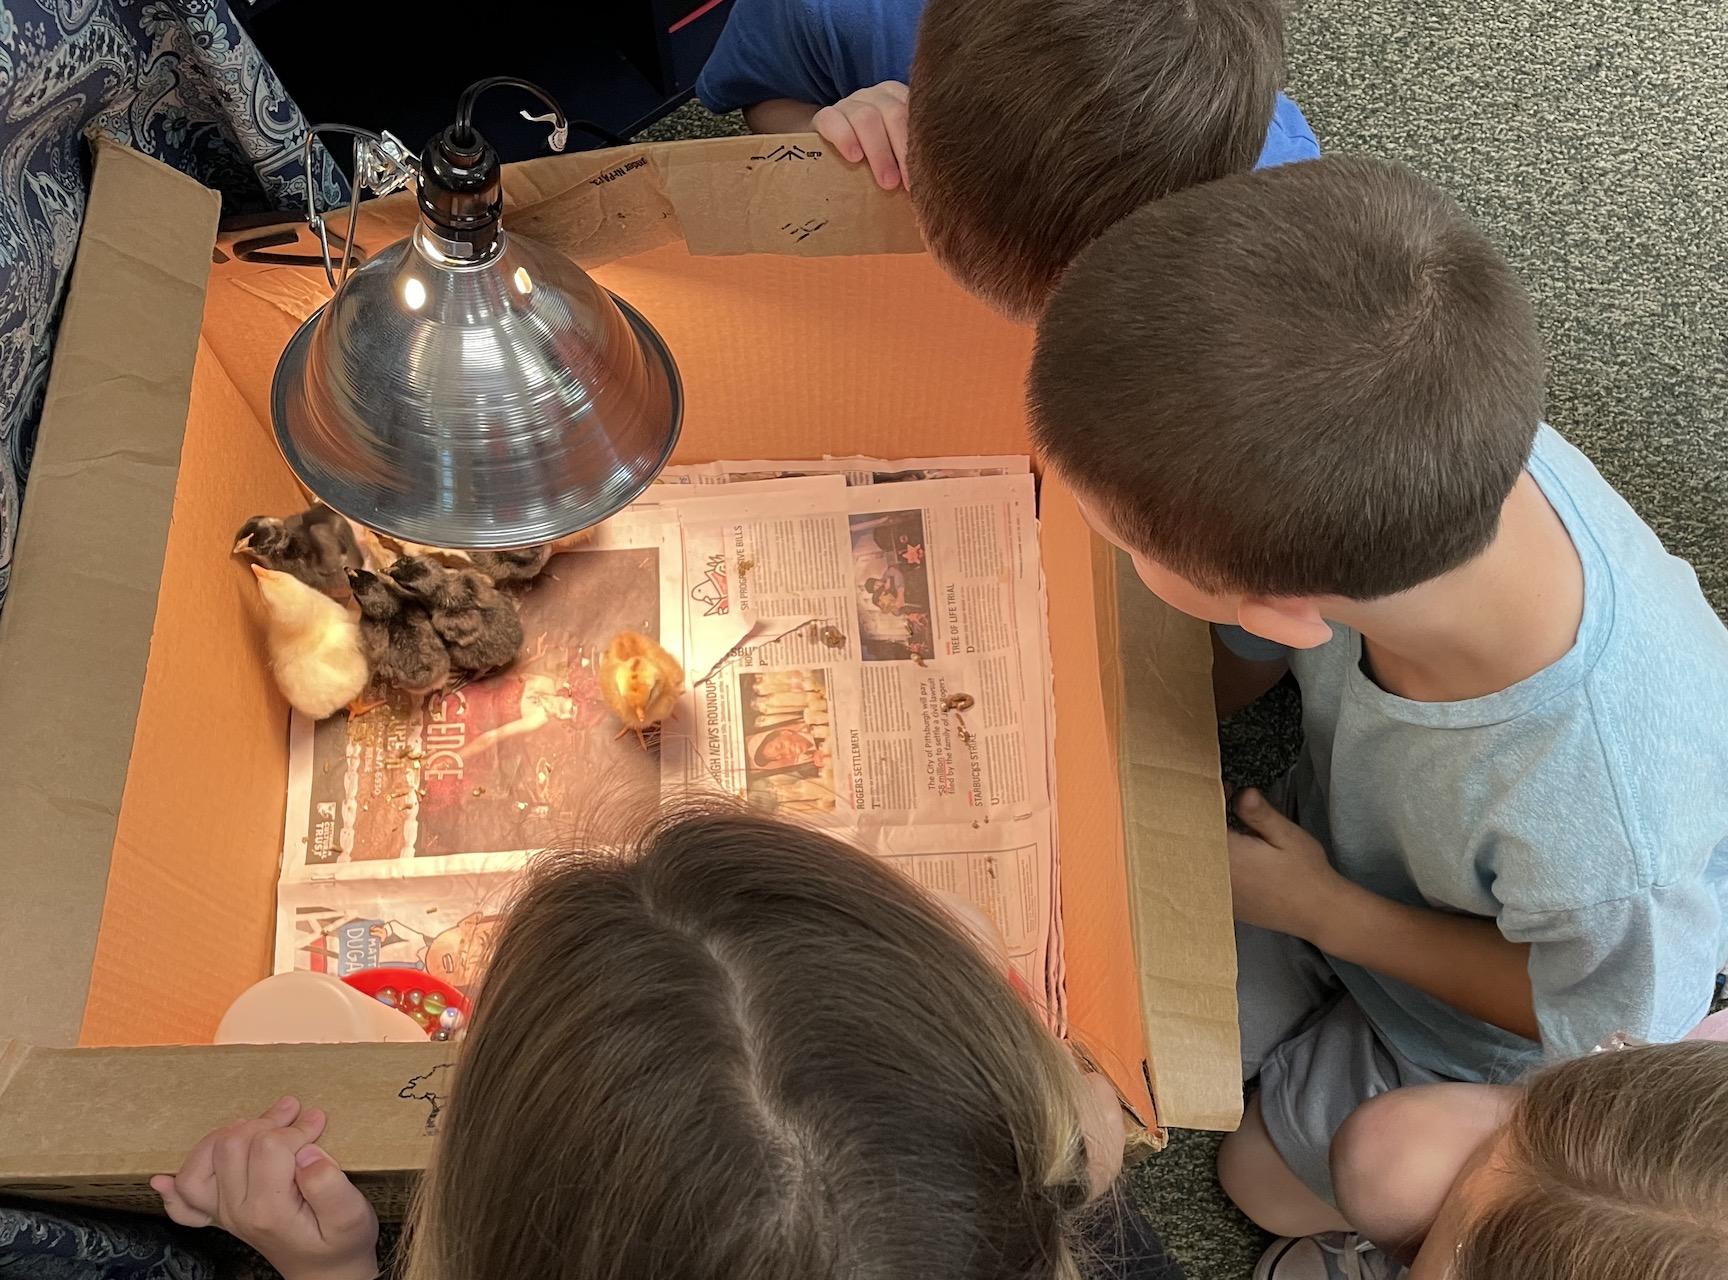 Students watch the newly-hatched chicks